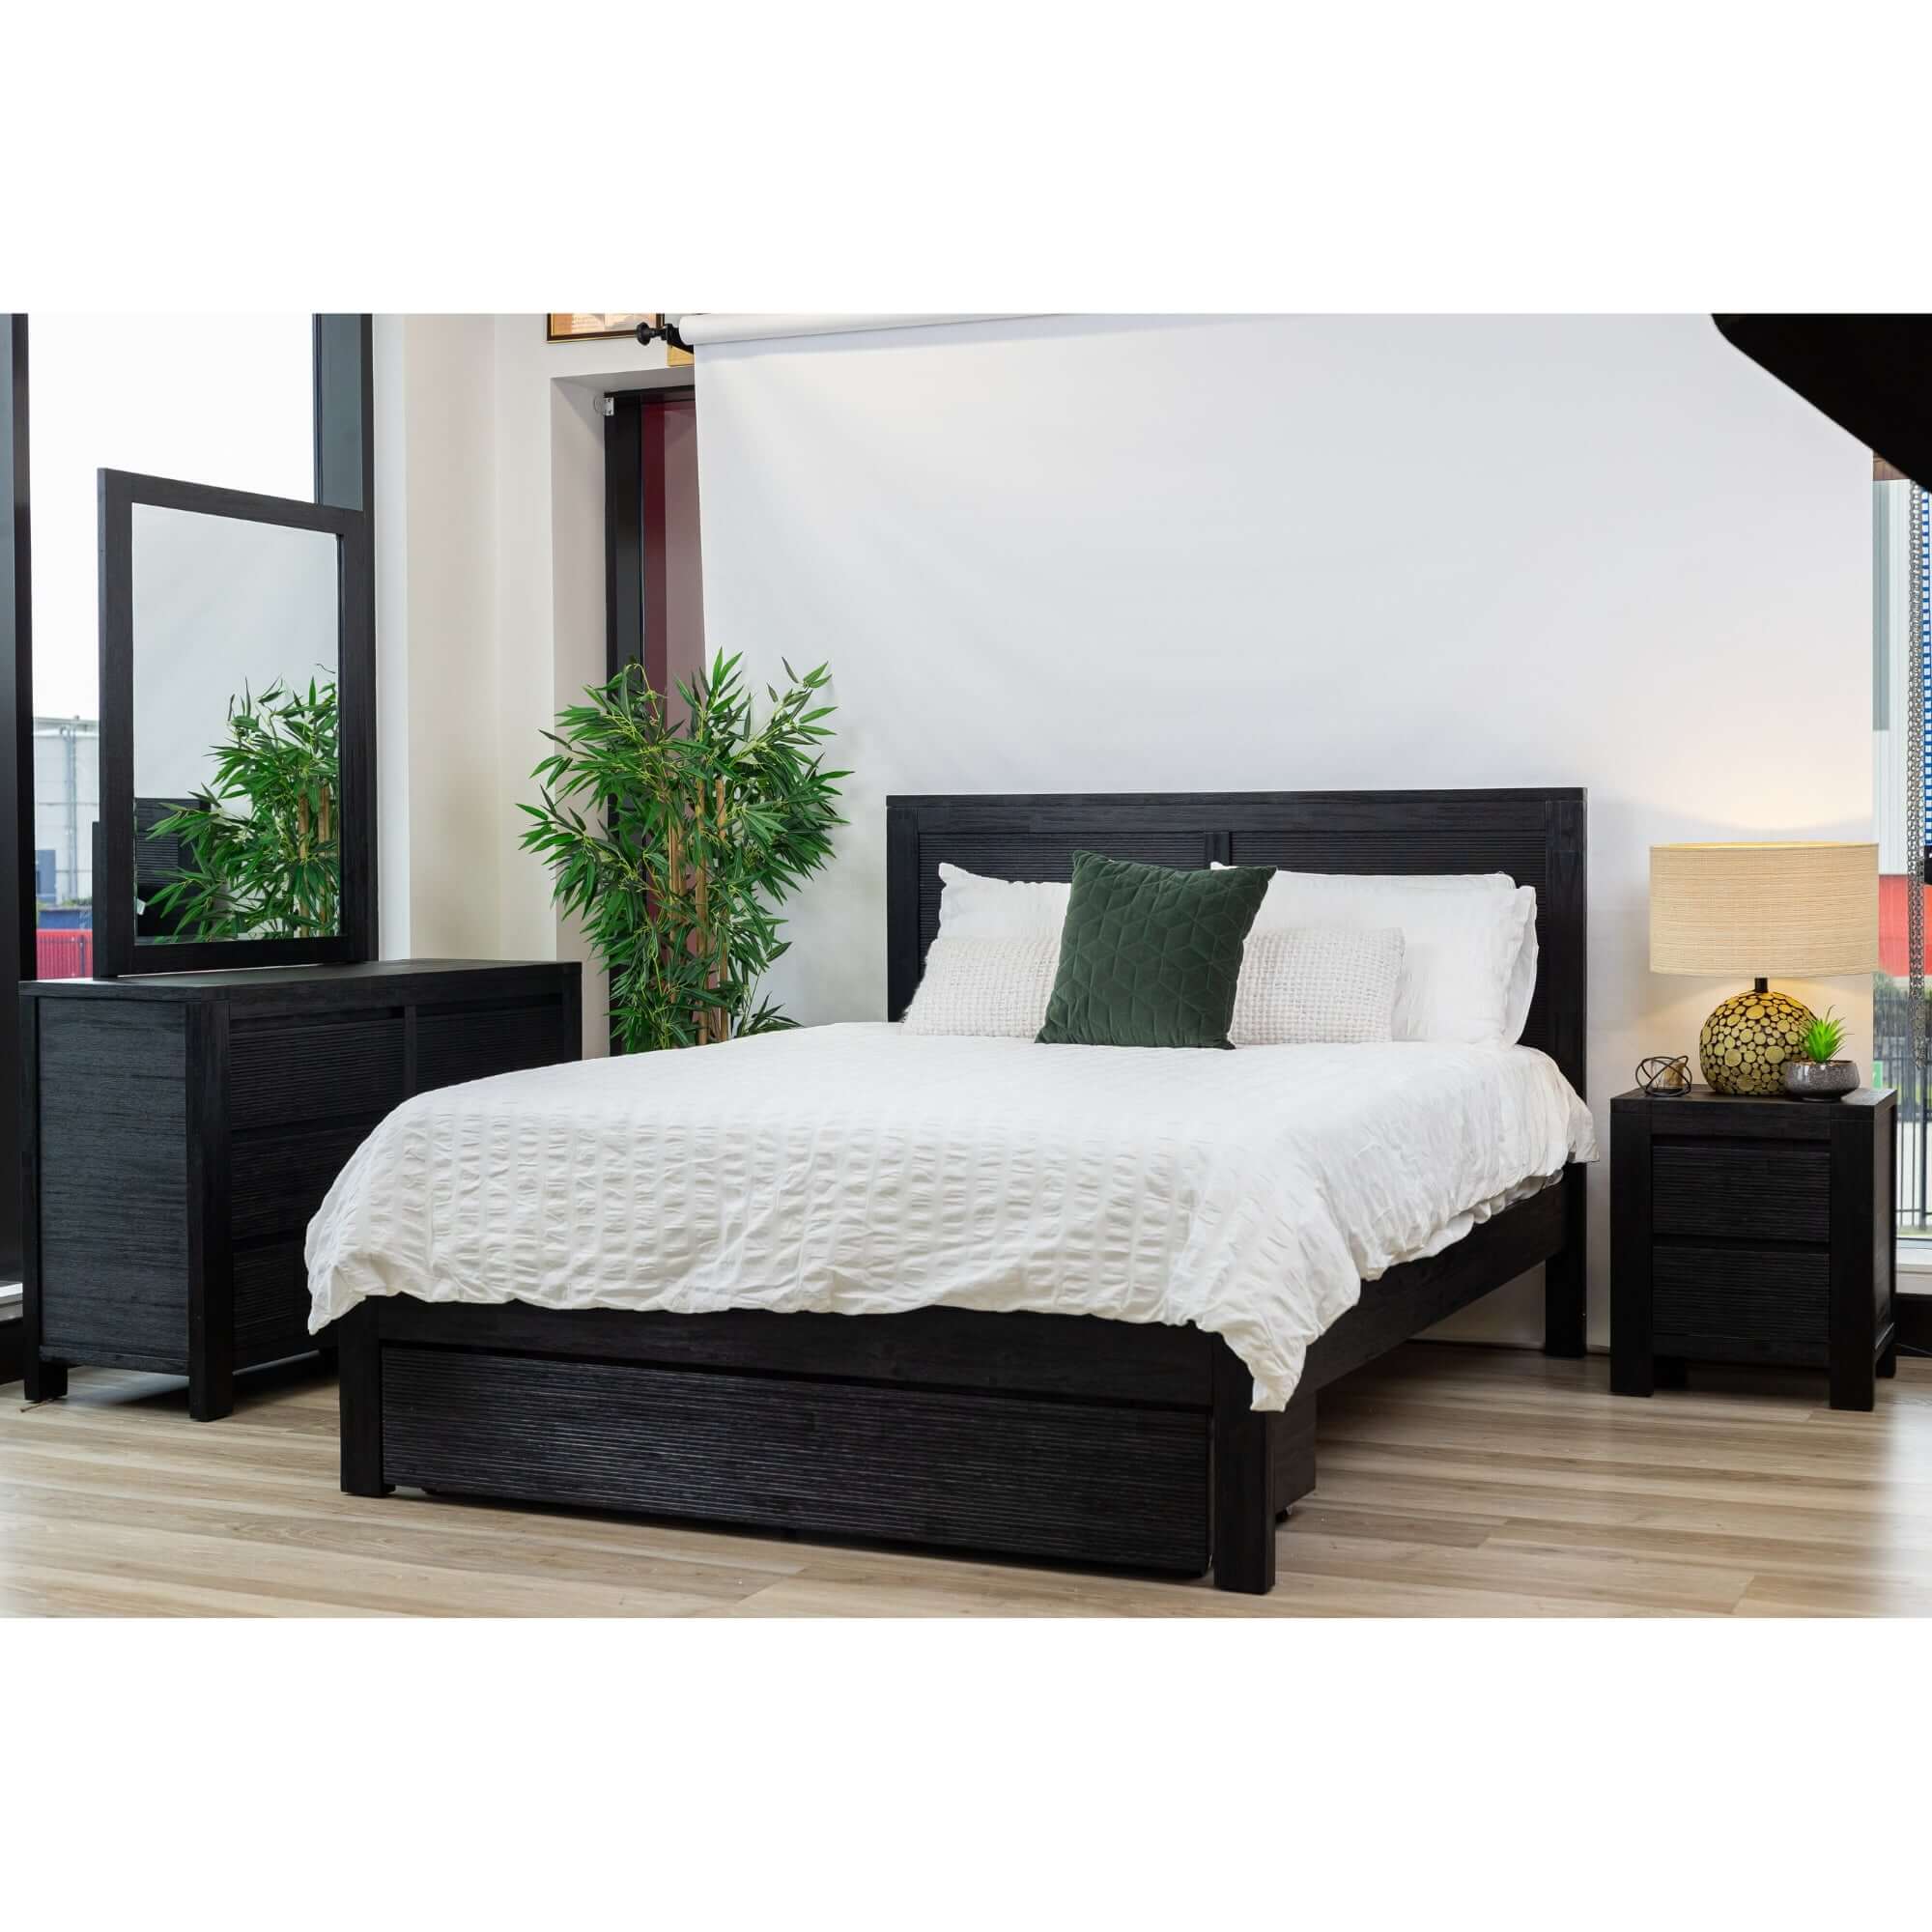 King-Size Tofino Bed Frame with Storage - Black-Upinteriors